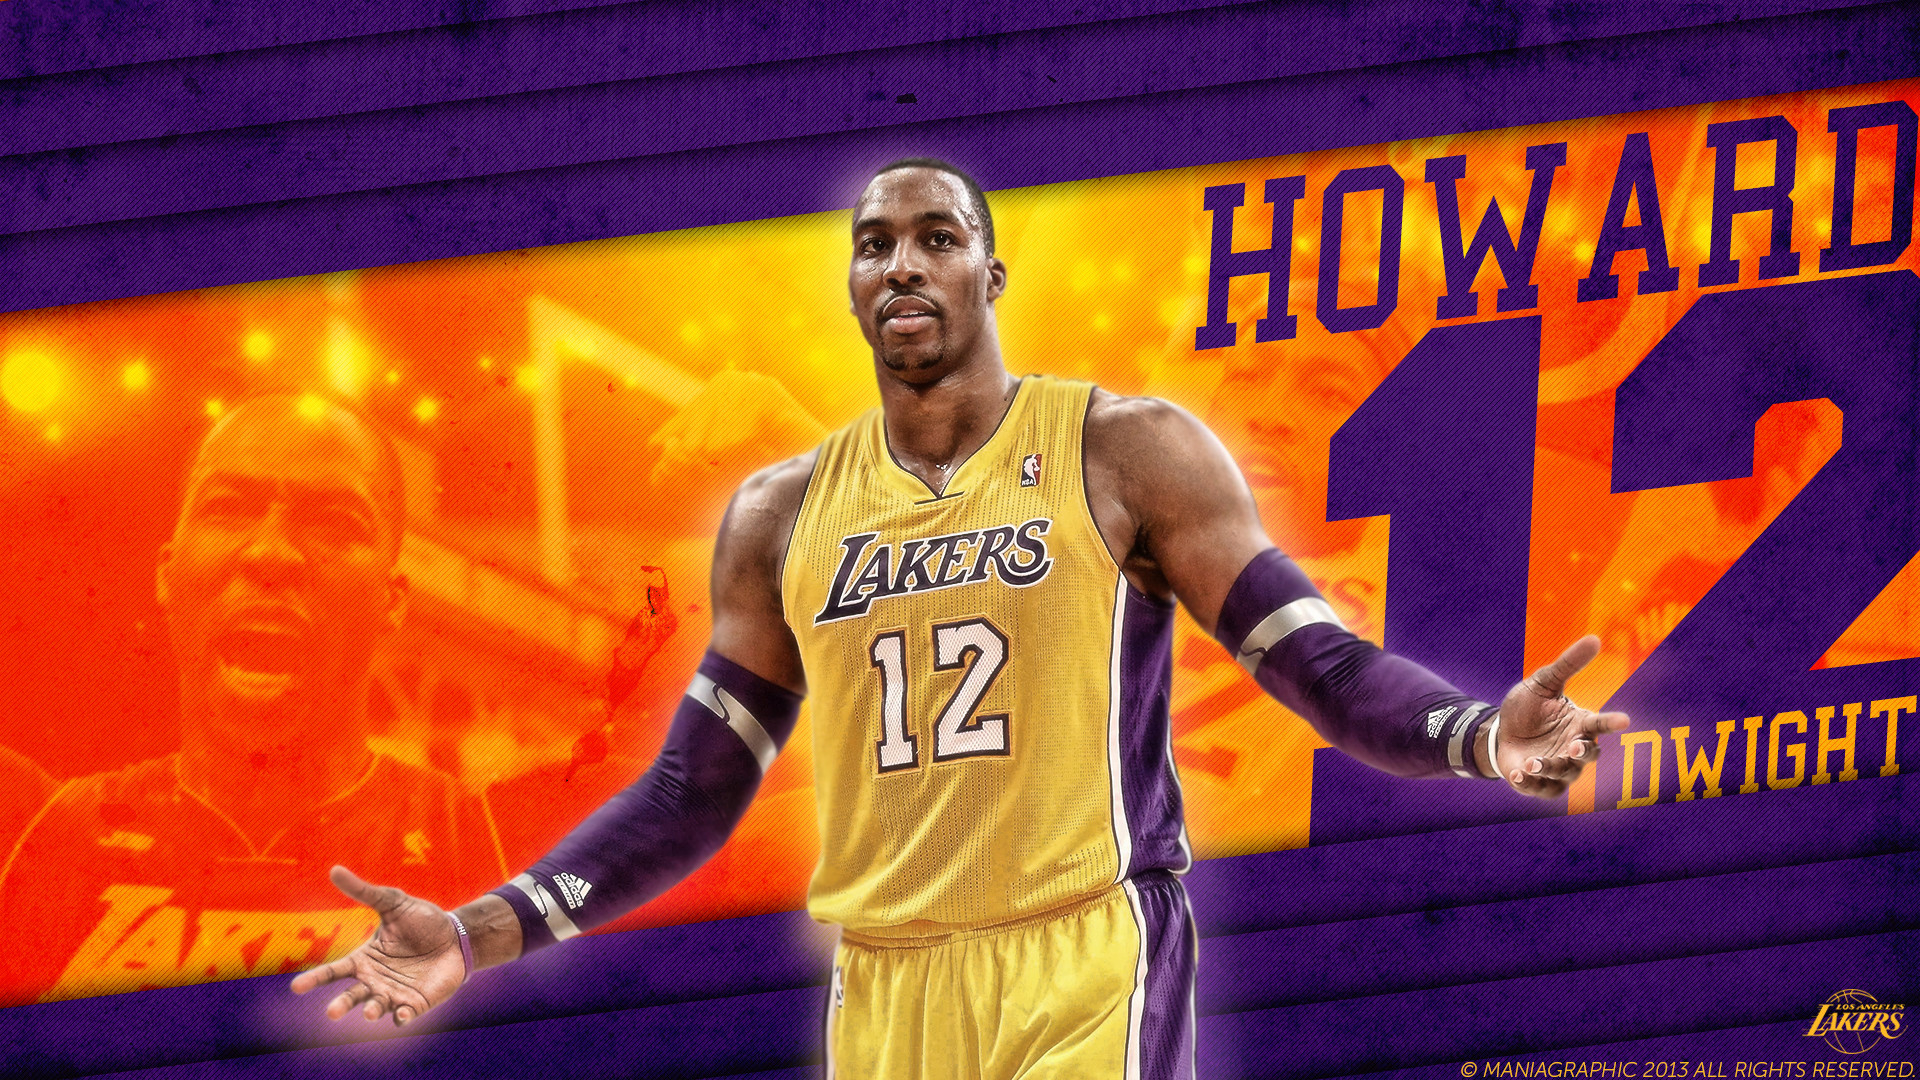 1920x1080 Dwight Howard Wallpaper by ManiaGraphic Dwight Howard Wallpaper by  ManiaGraphic